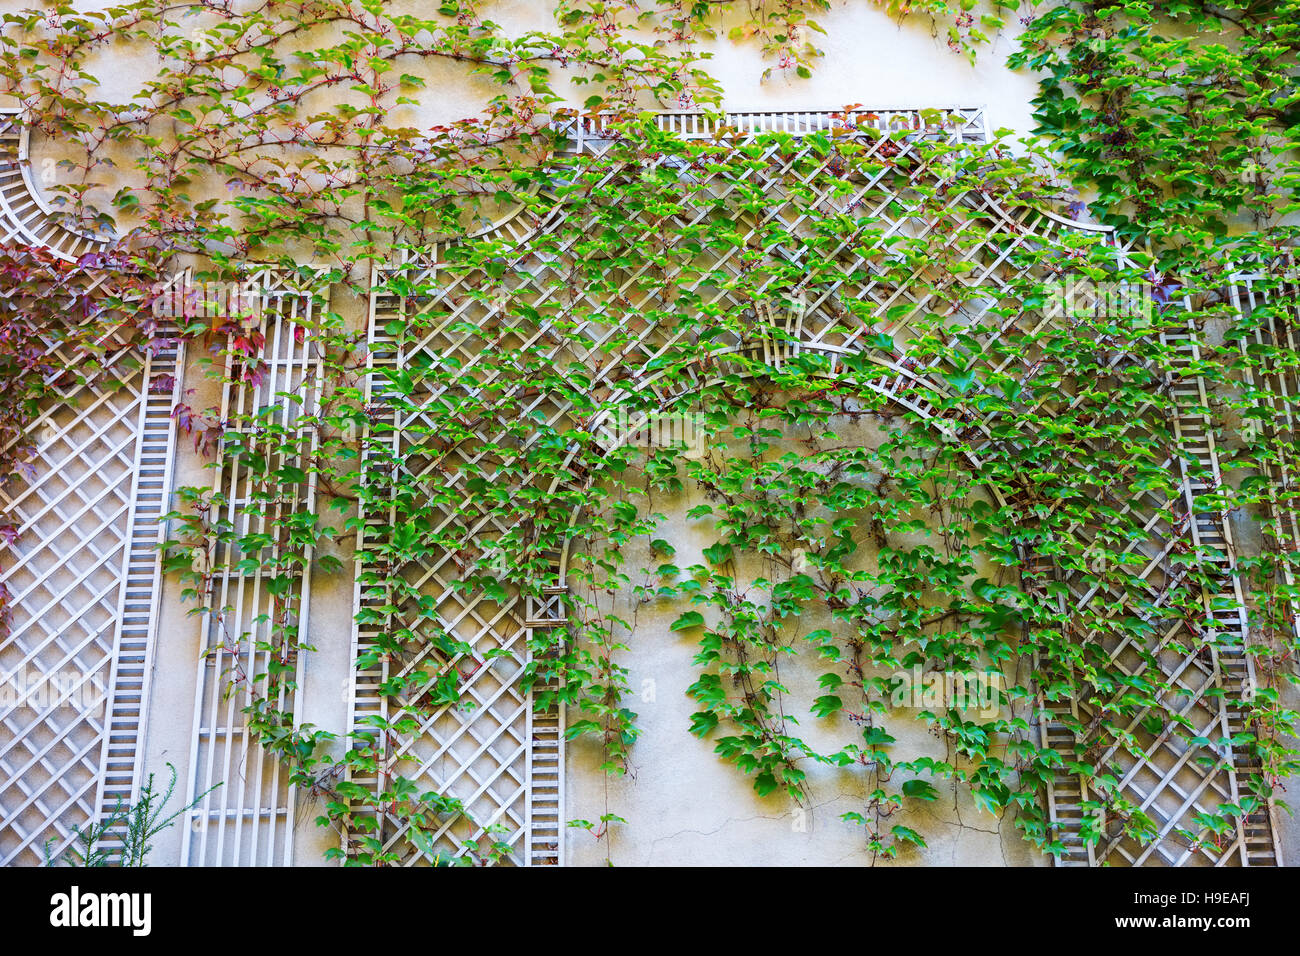 wall with vintage style climbing supports covered with vine tendrils Stock Photo